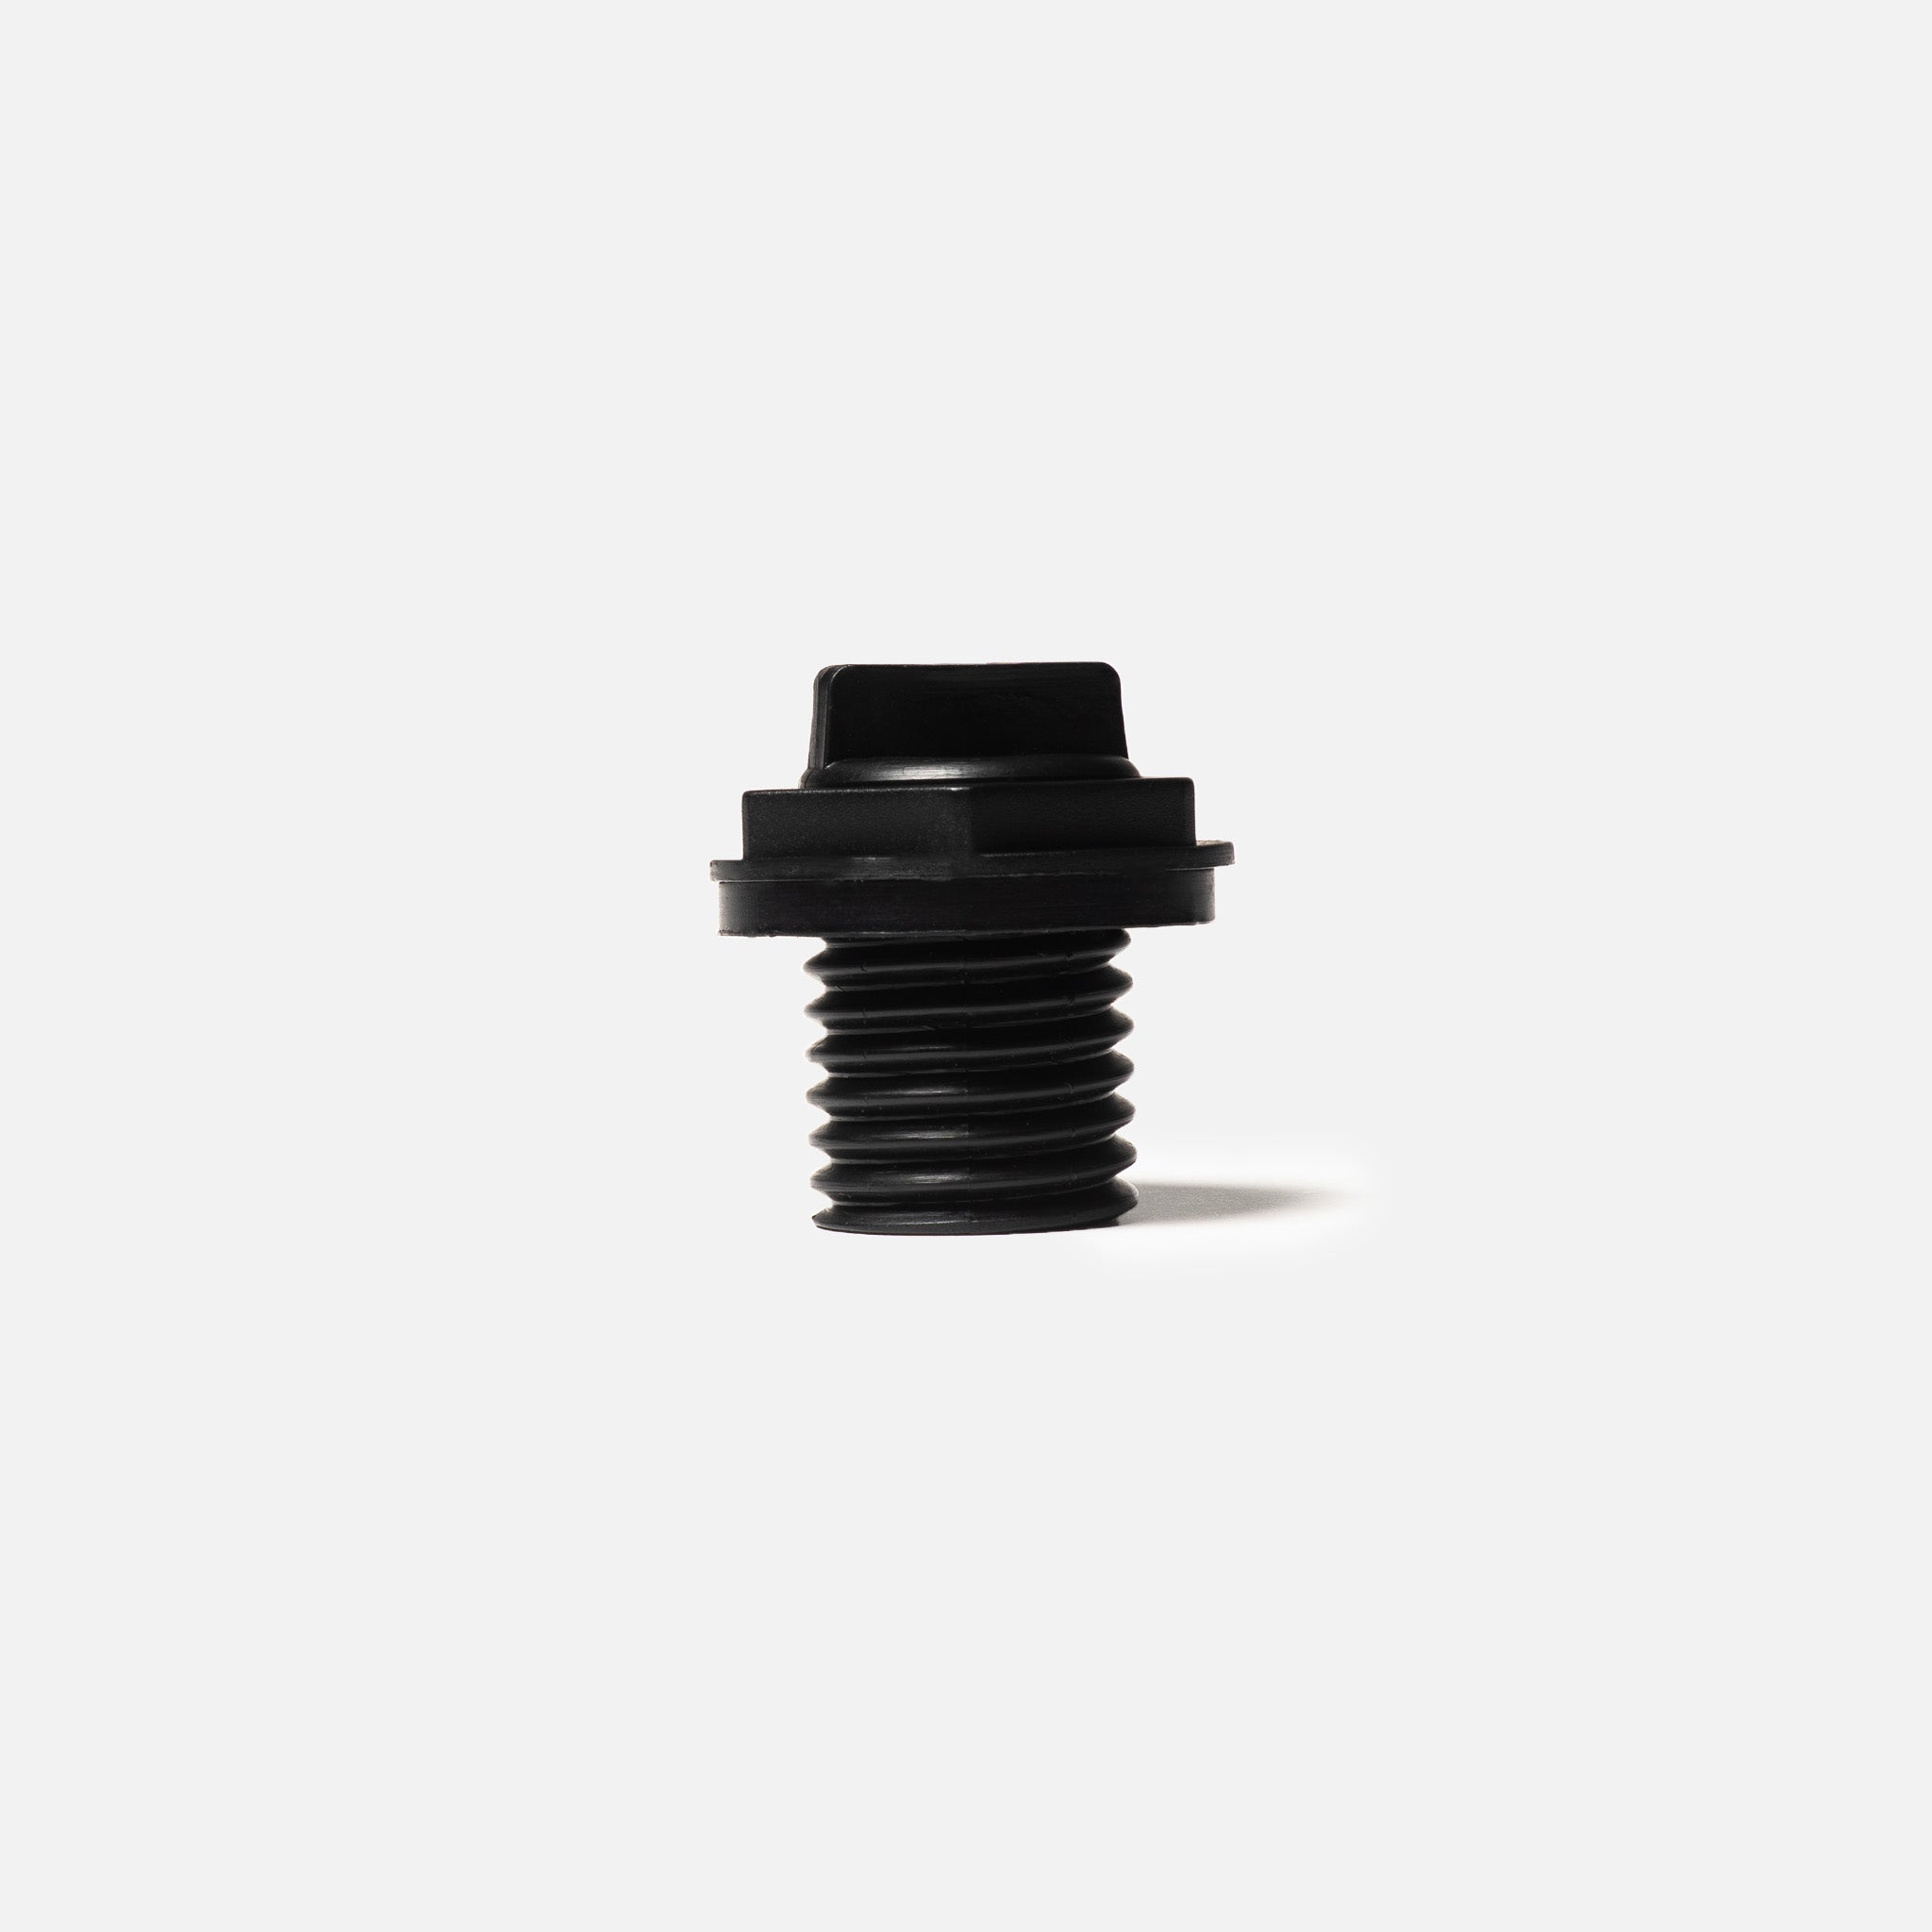 Honoson Cooler Drain Plugs Replacement Compatible with Most